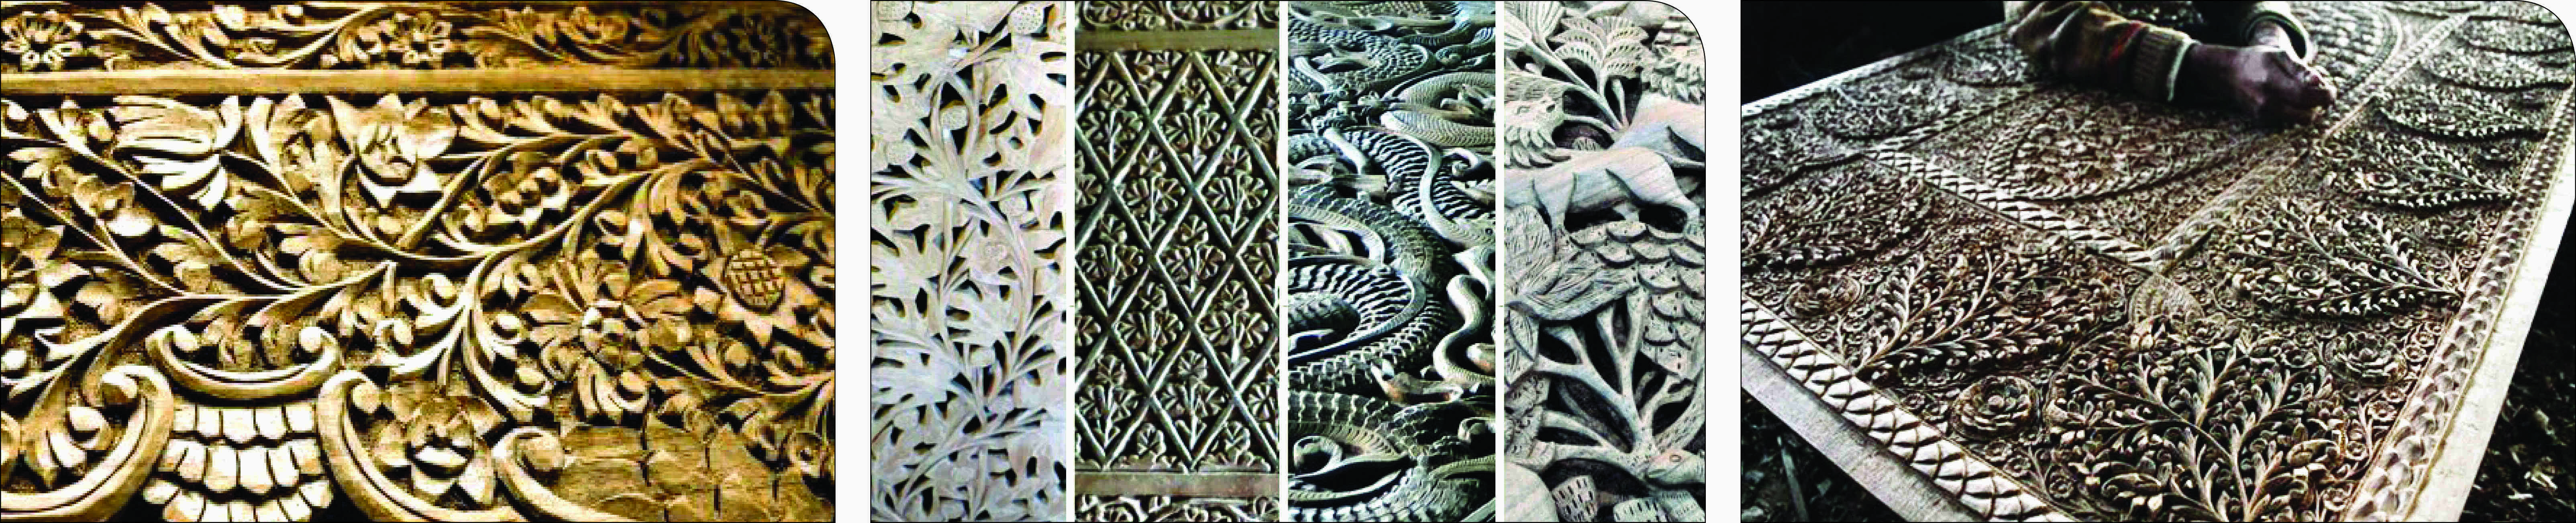 Exquisite carvings of Kashmir